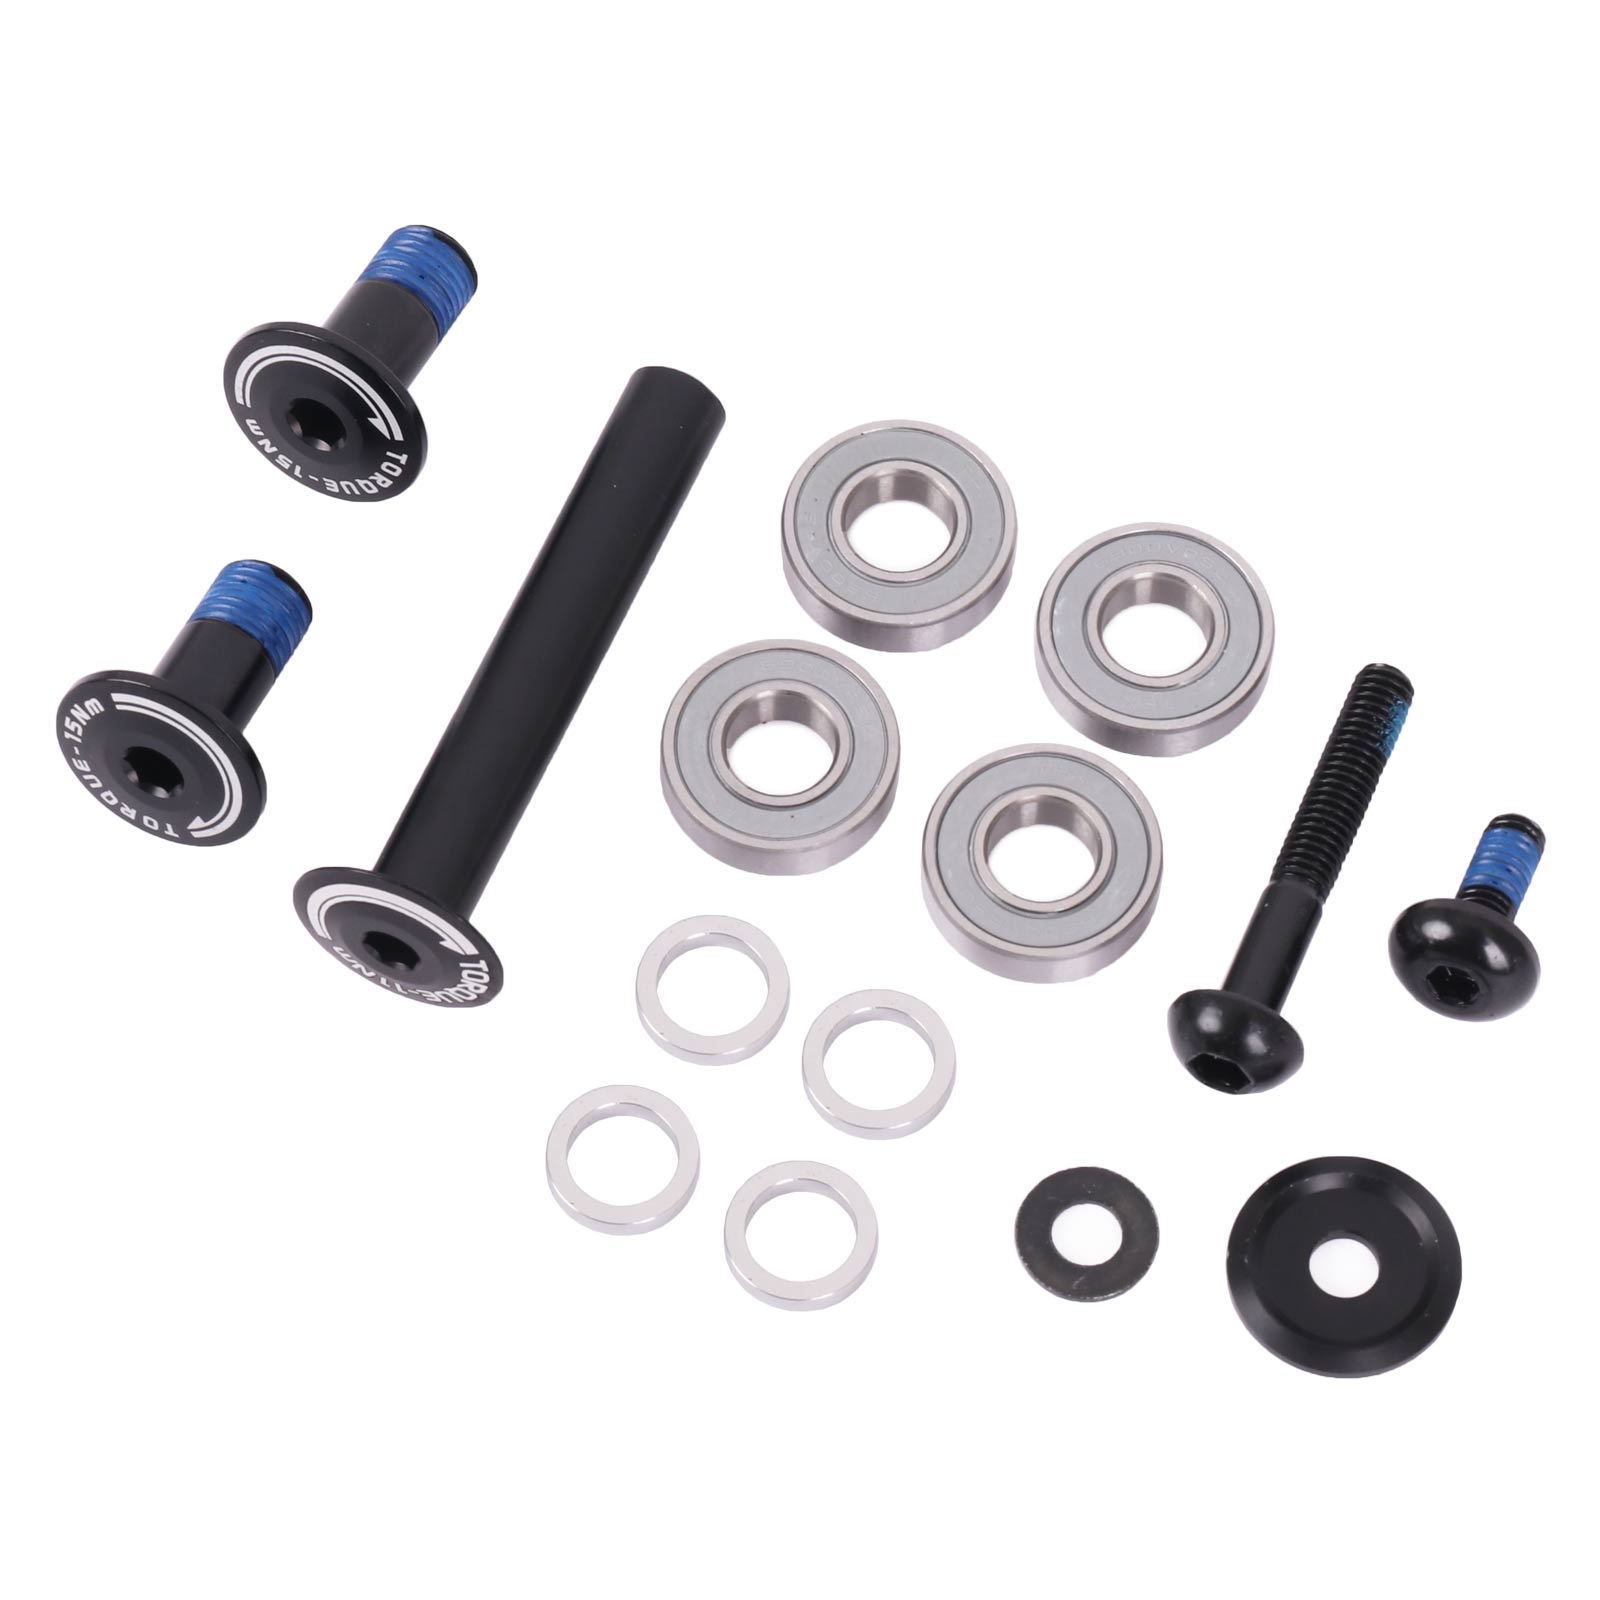 Picture of Giant GM7134 Rear Shock Accessories for Stance E+ | Rock Bolt - 1280GM713404A1